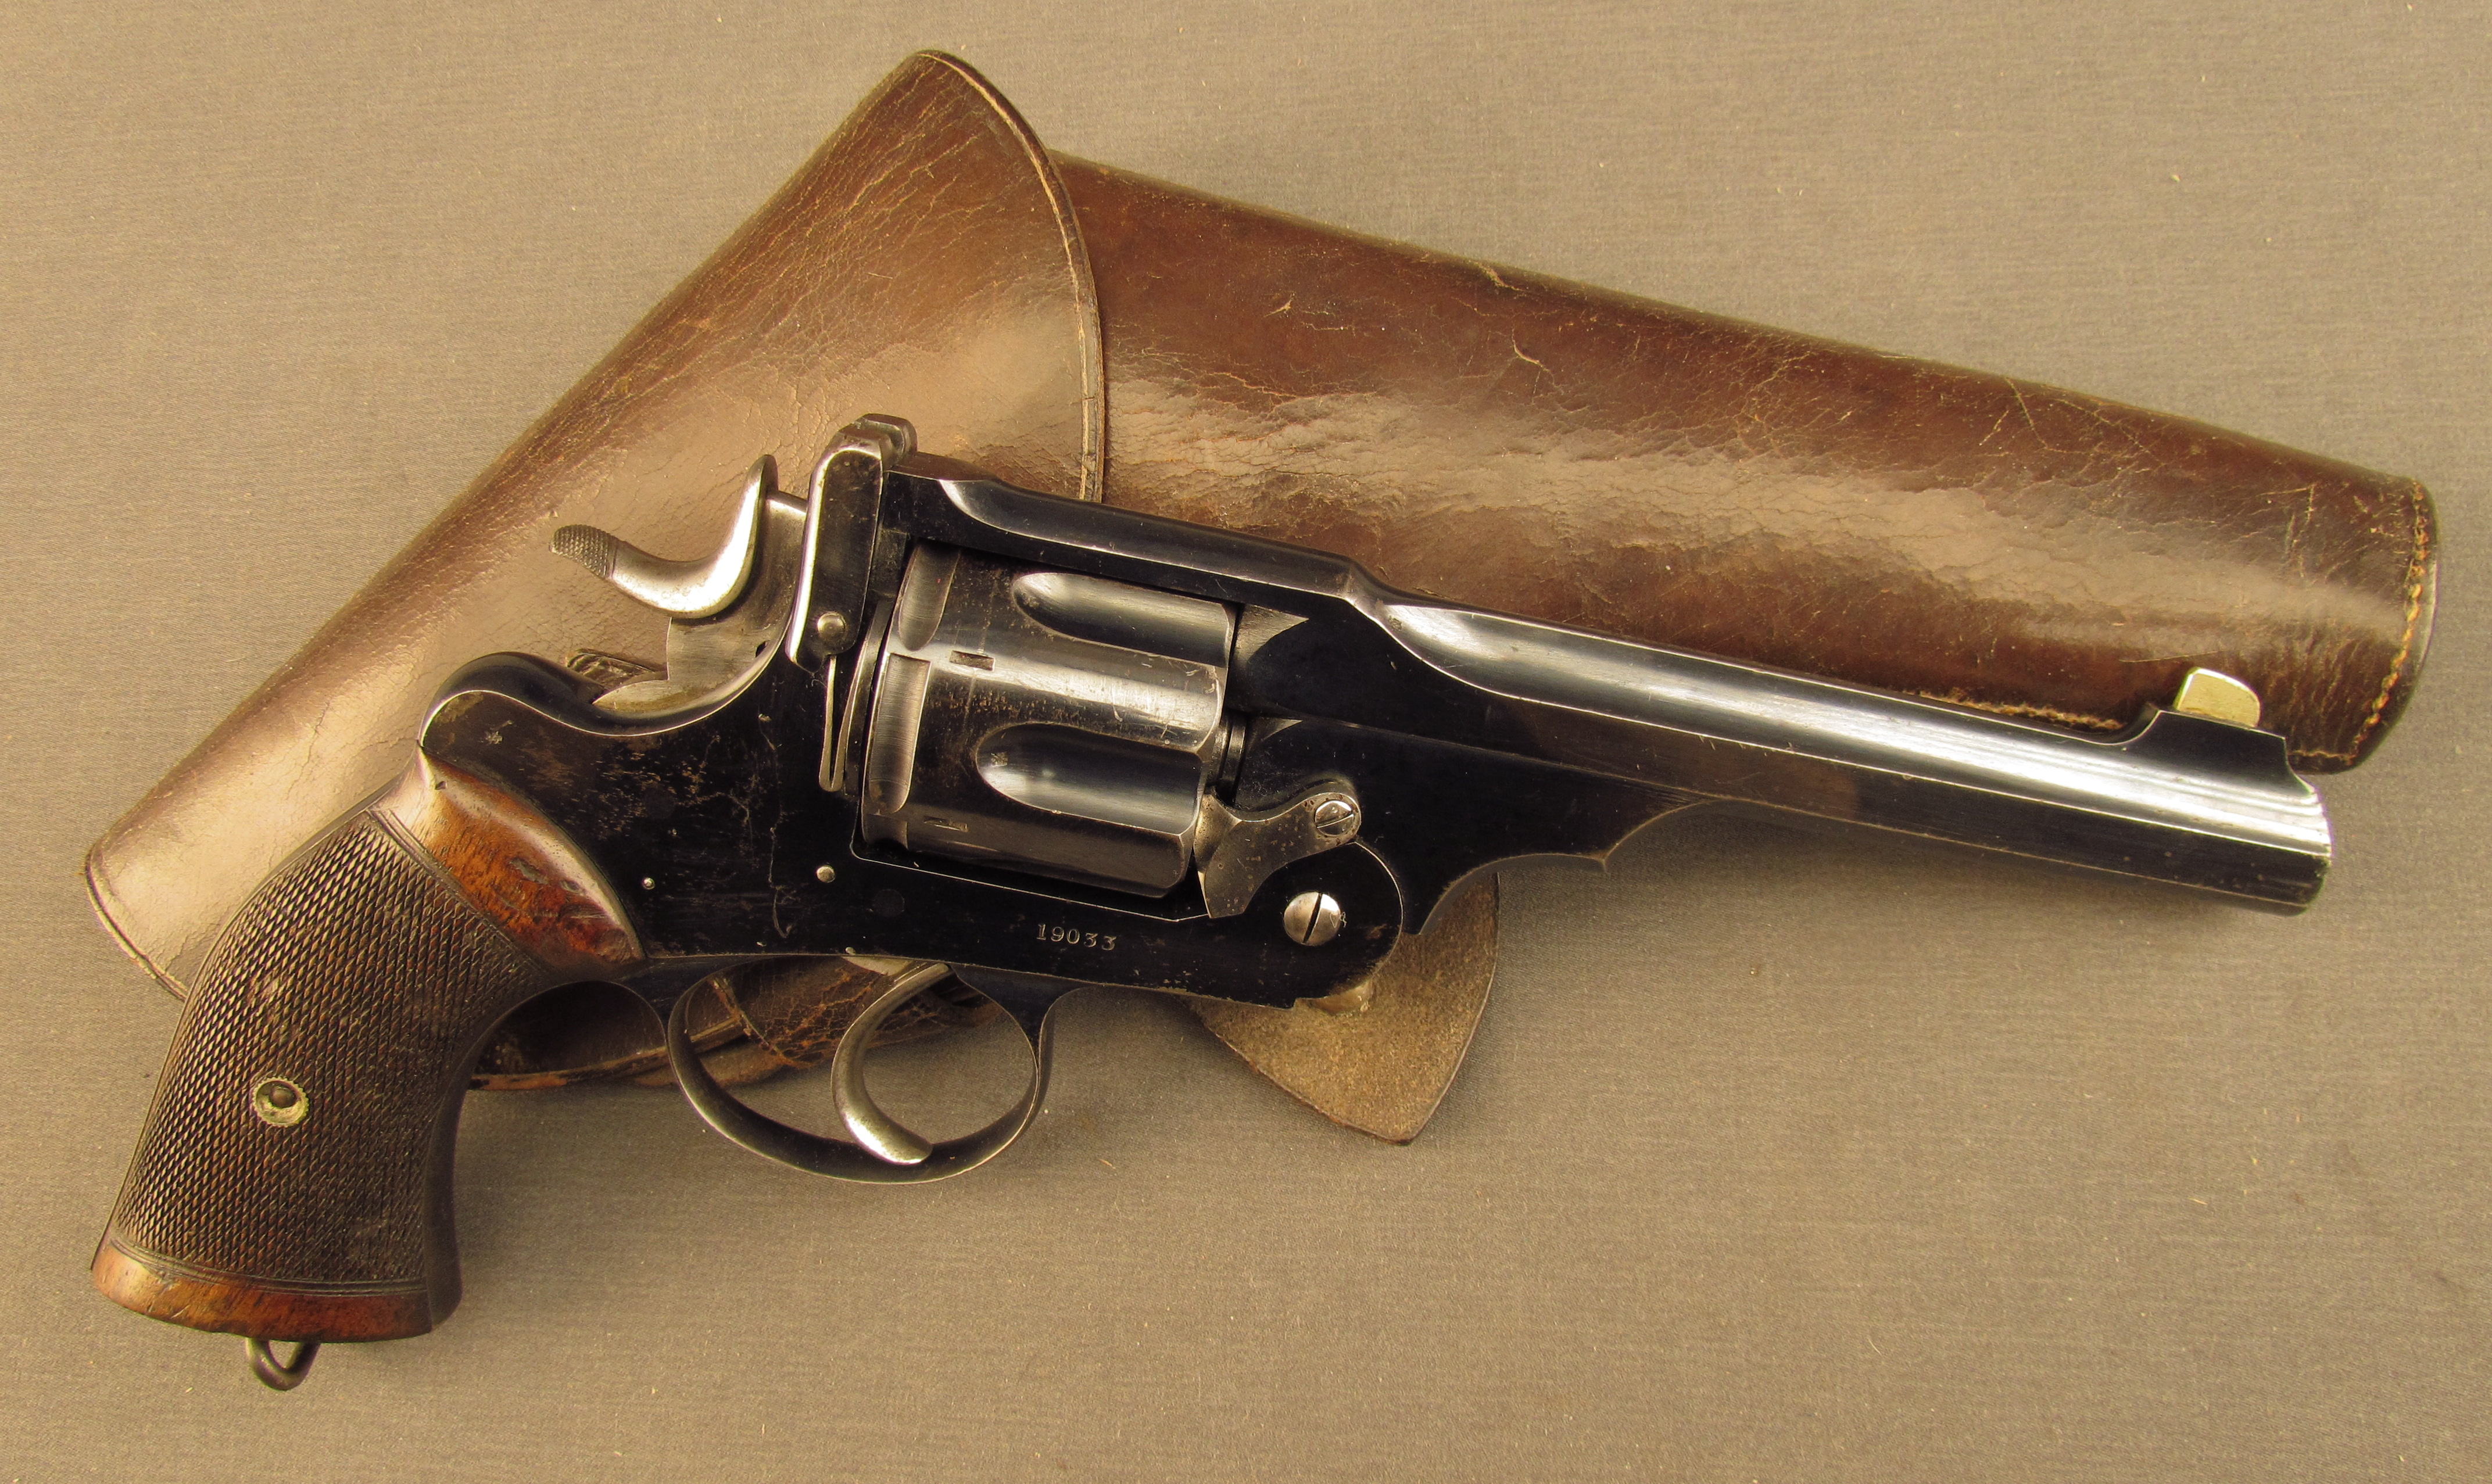 Amazing Webley Revolver Pictures & Backgrounds